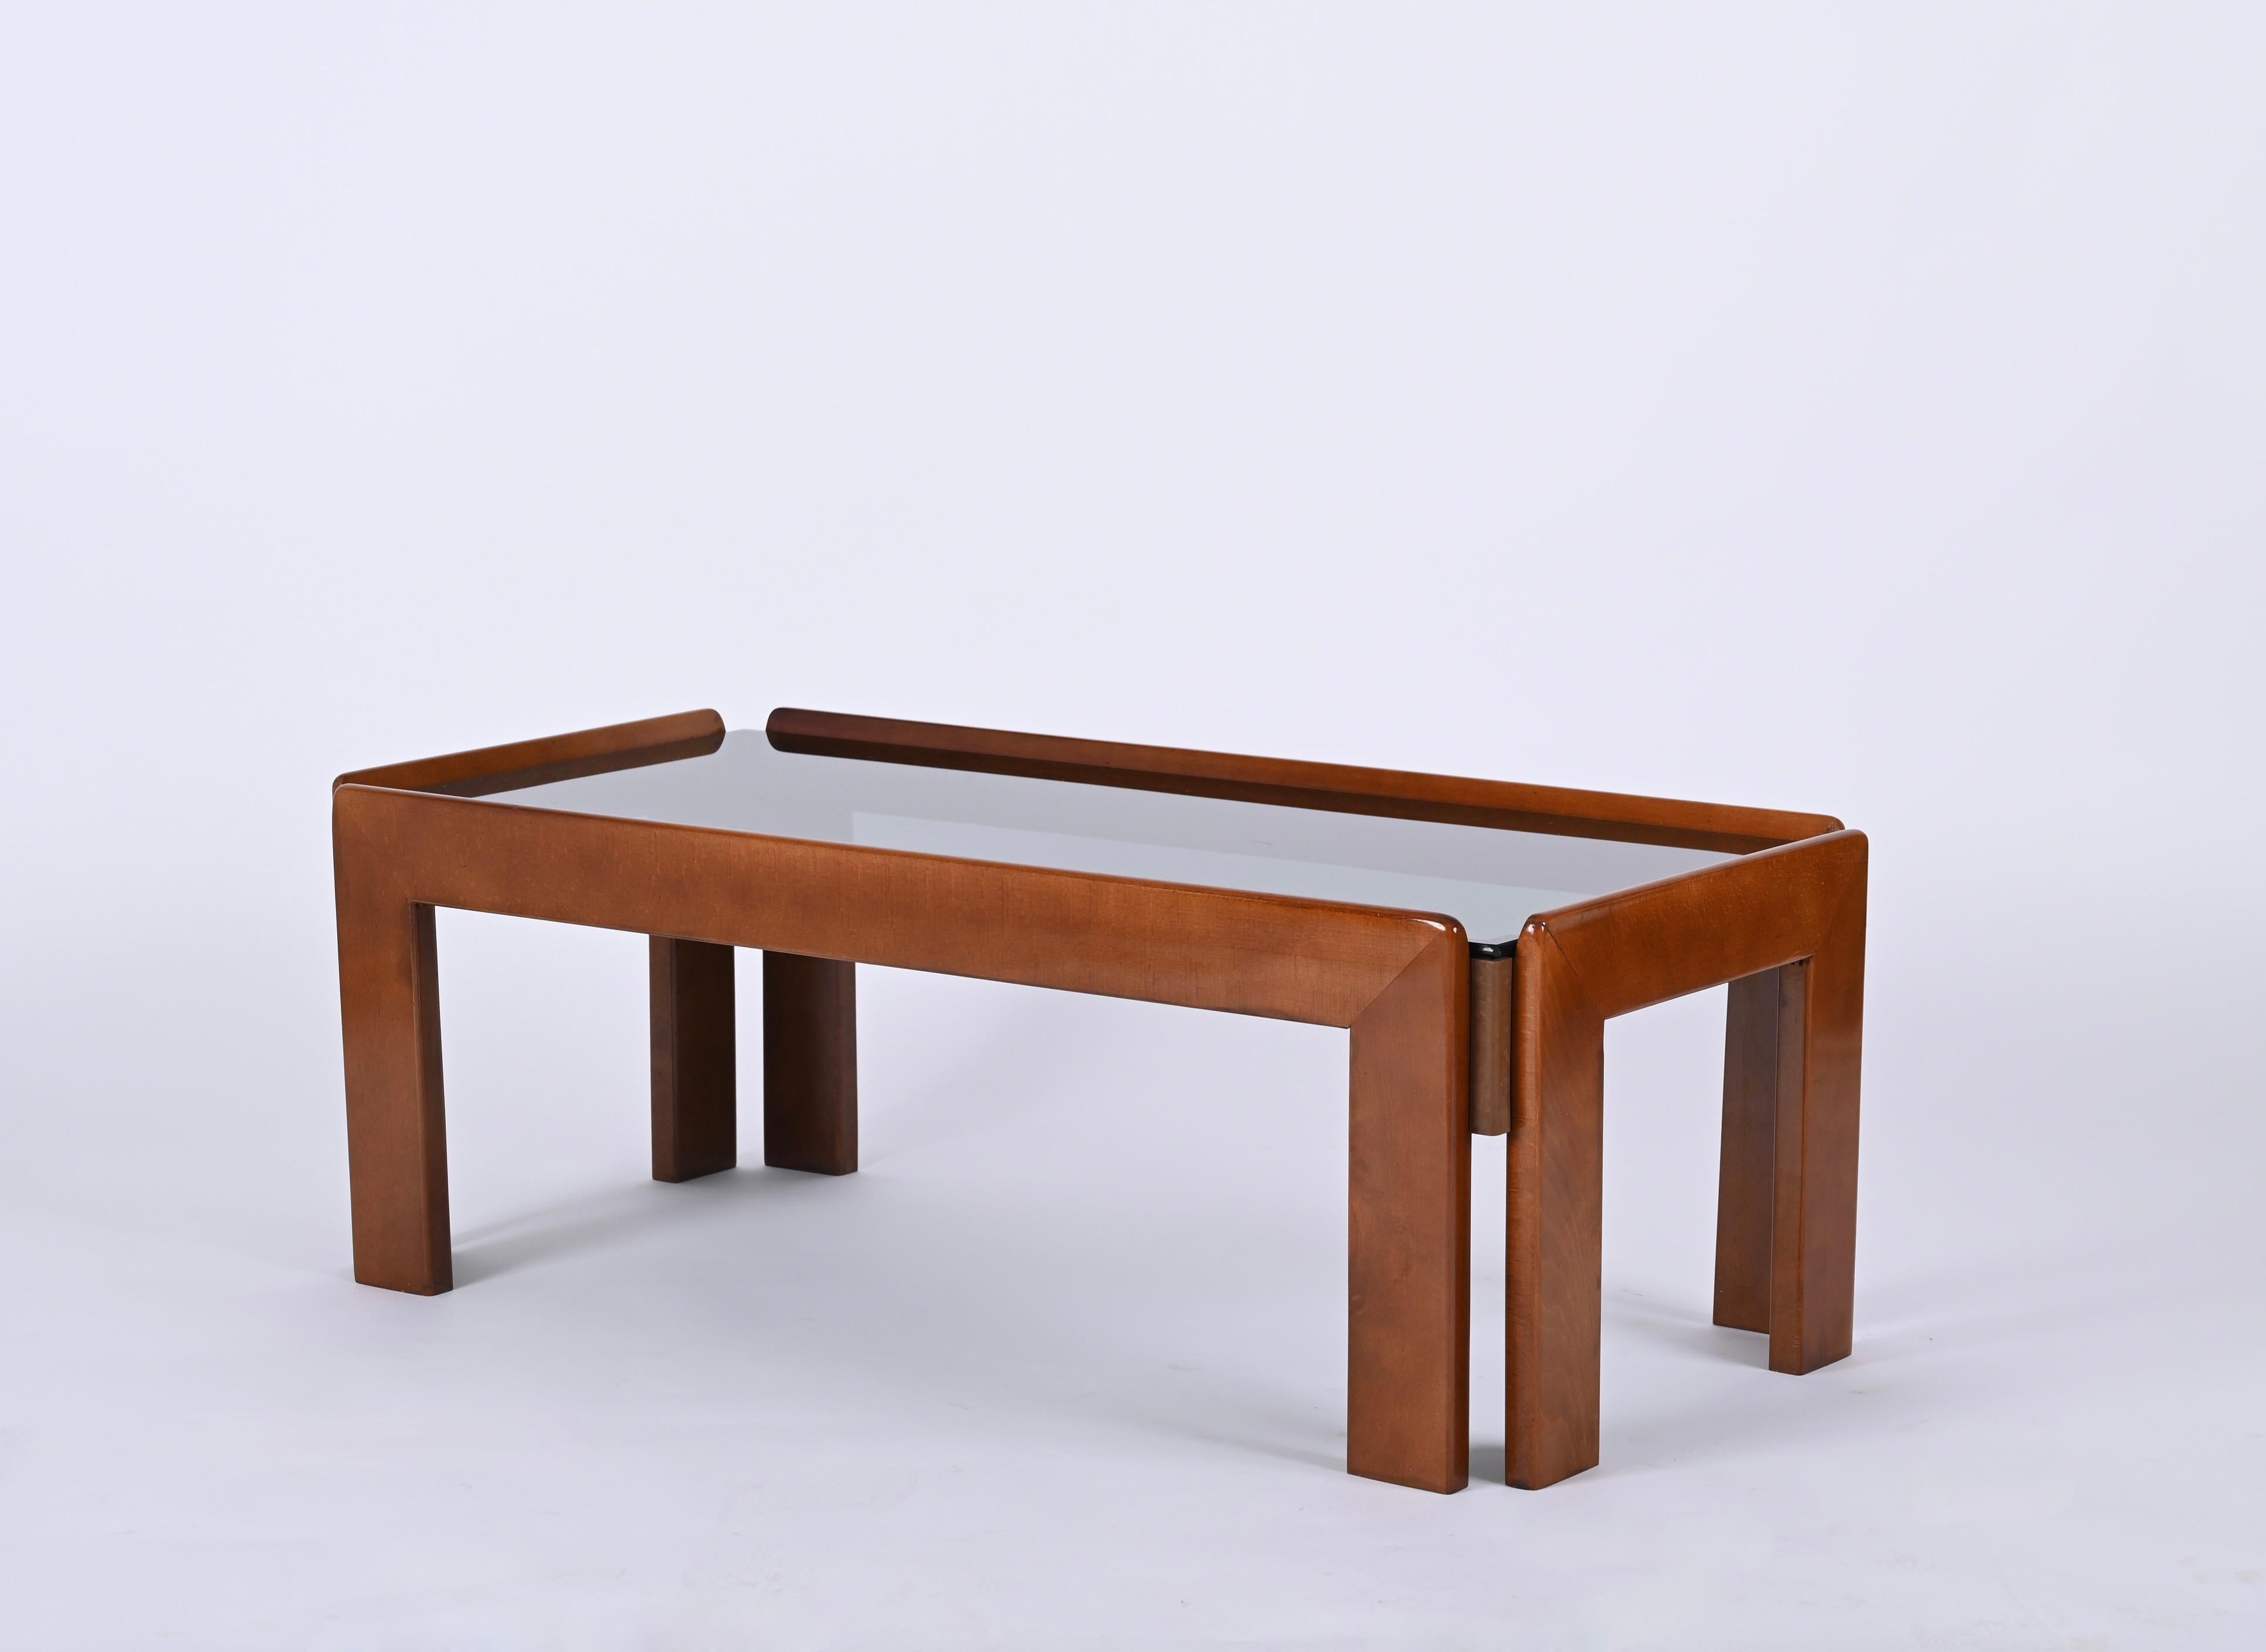 Stunning midcentury rectangular solid wood coffee table with smoked glass top. It was produced in Italy in the 1960s by Cassina and designed by Afra & Tobia Scarpa.

The coffee table is made in a beatiful yet sturdy walnut wood and is in amazing